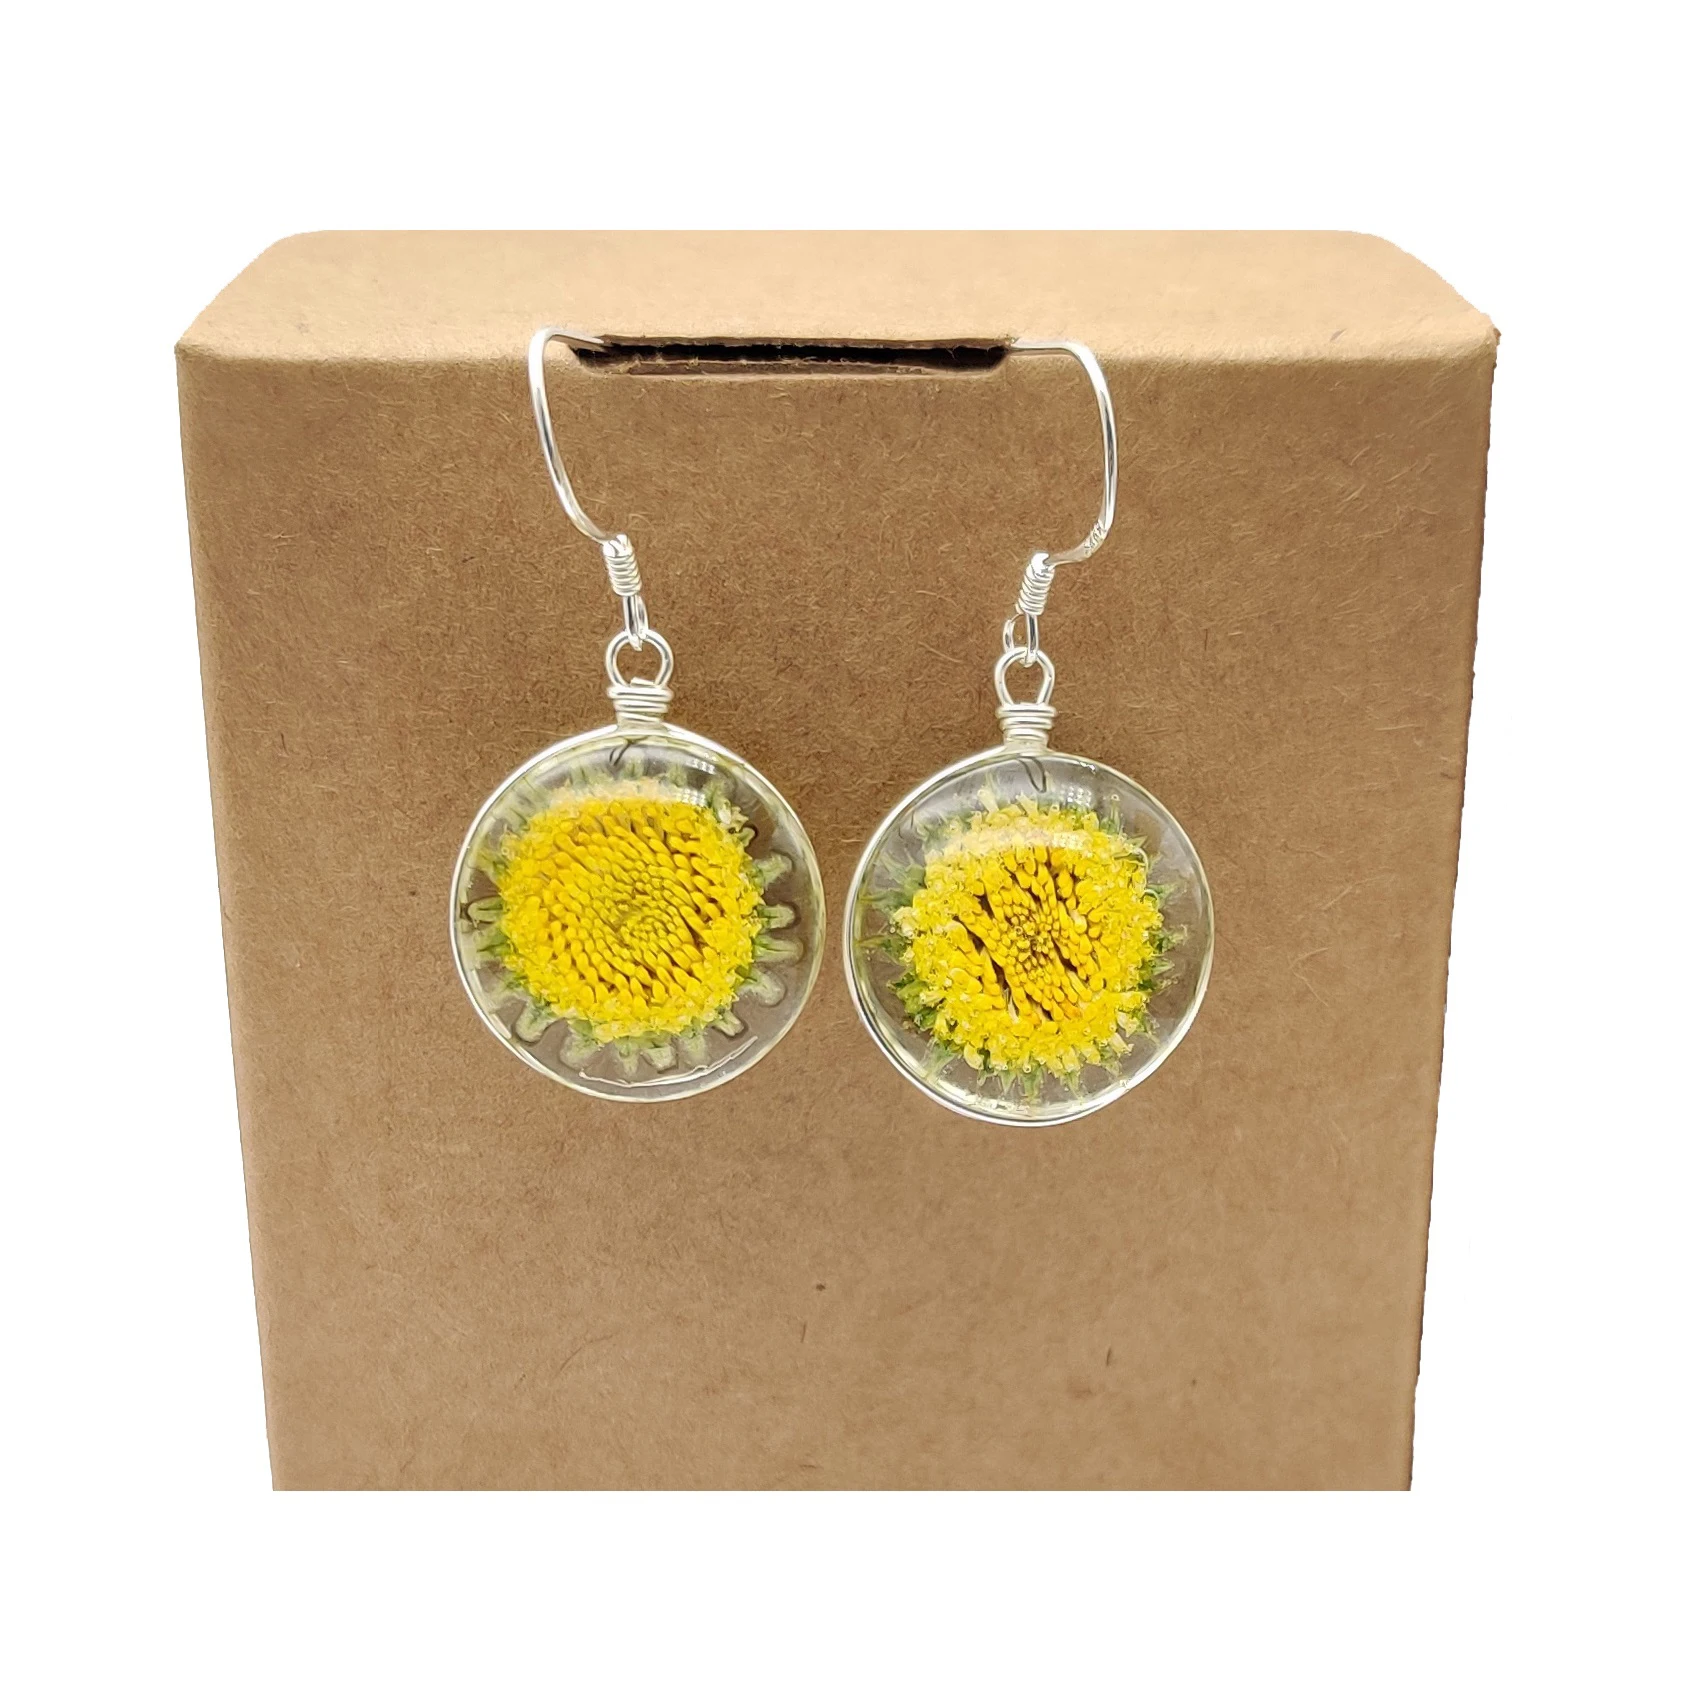 Sunflower Sunshine Daisy Glass Sterling 925 Silver Needle Drop Earrings For Women Boho Fashion Jewelry Bohemian Cute Handmade sunshine ss 057ur uv ar anti reflection fiber glass protective film suitable for front back film of mobile phone watch airpods